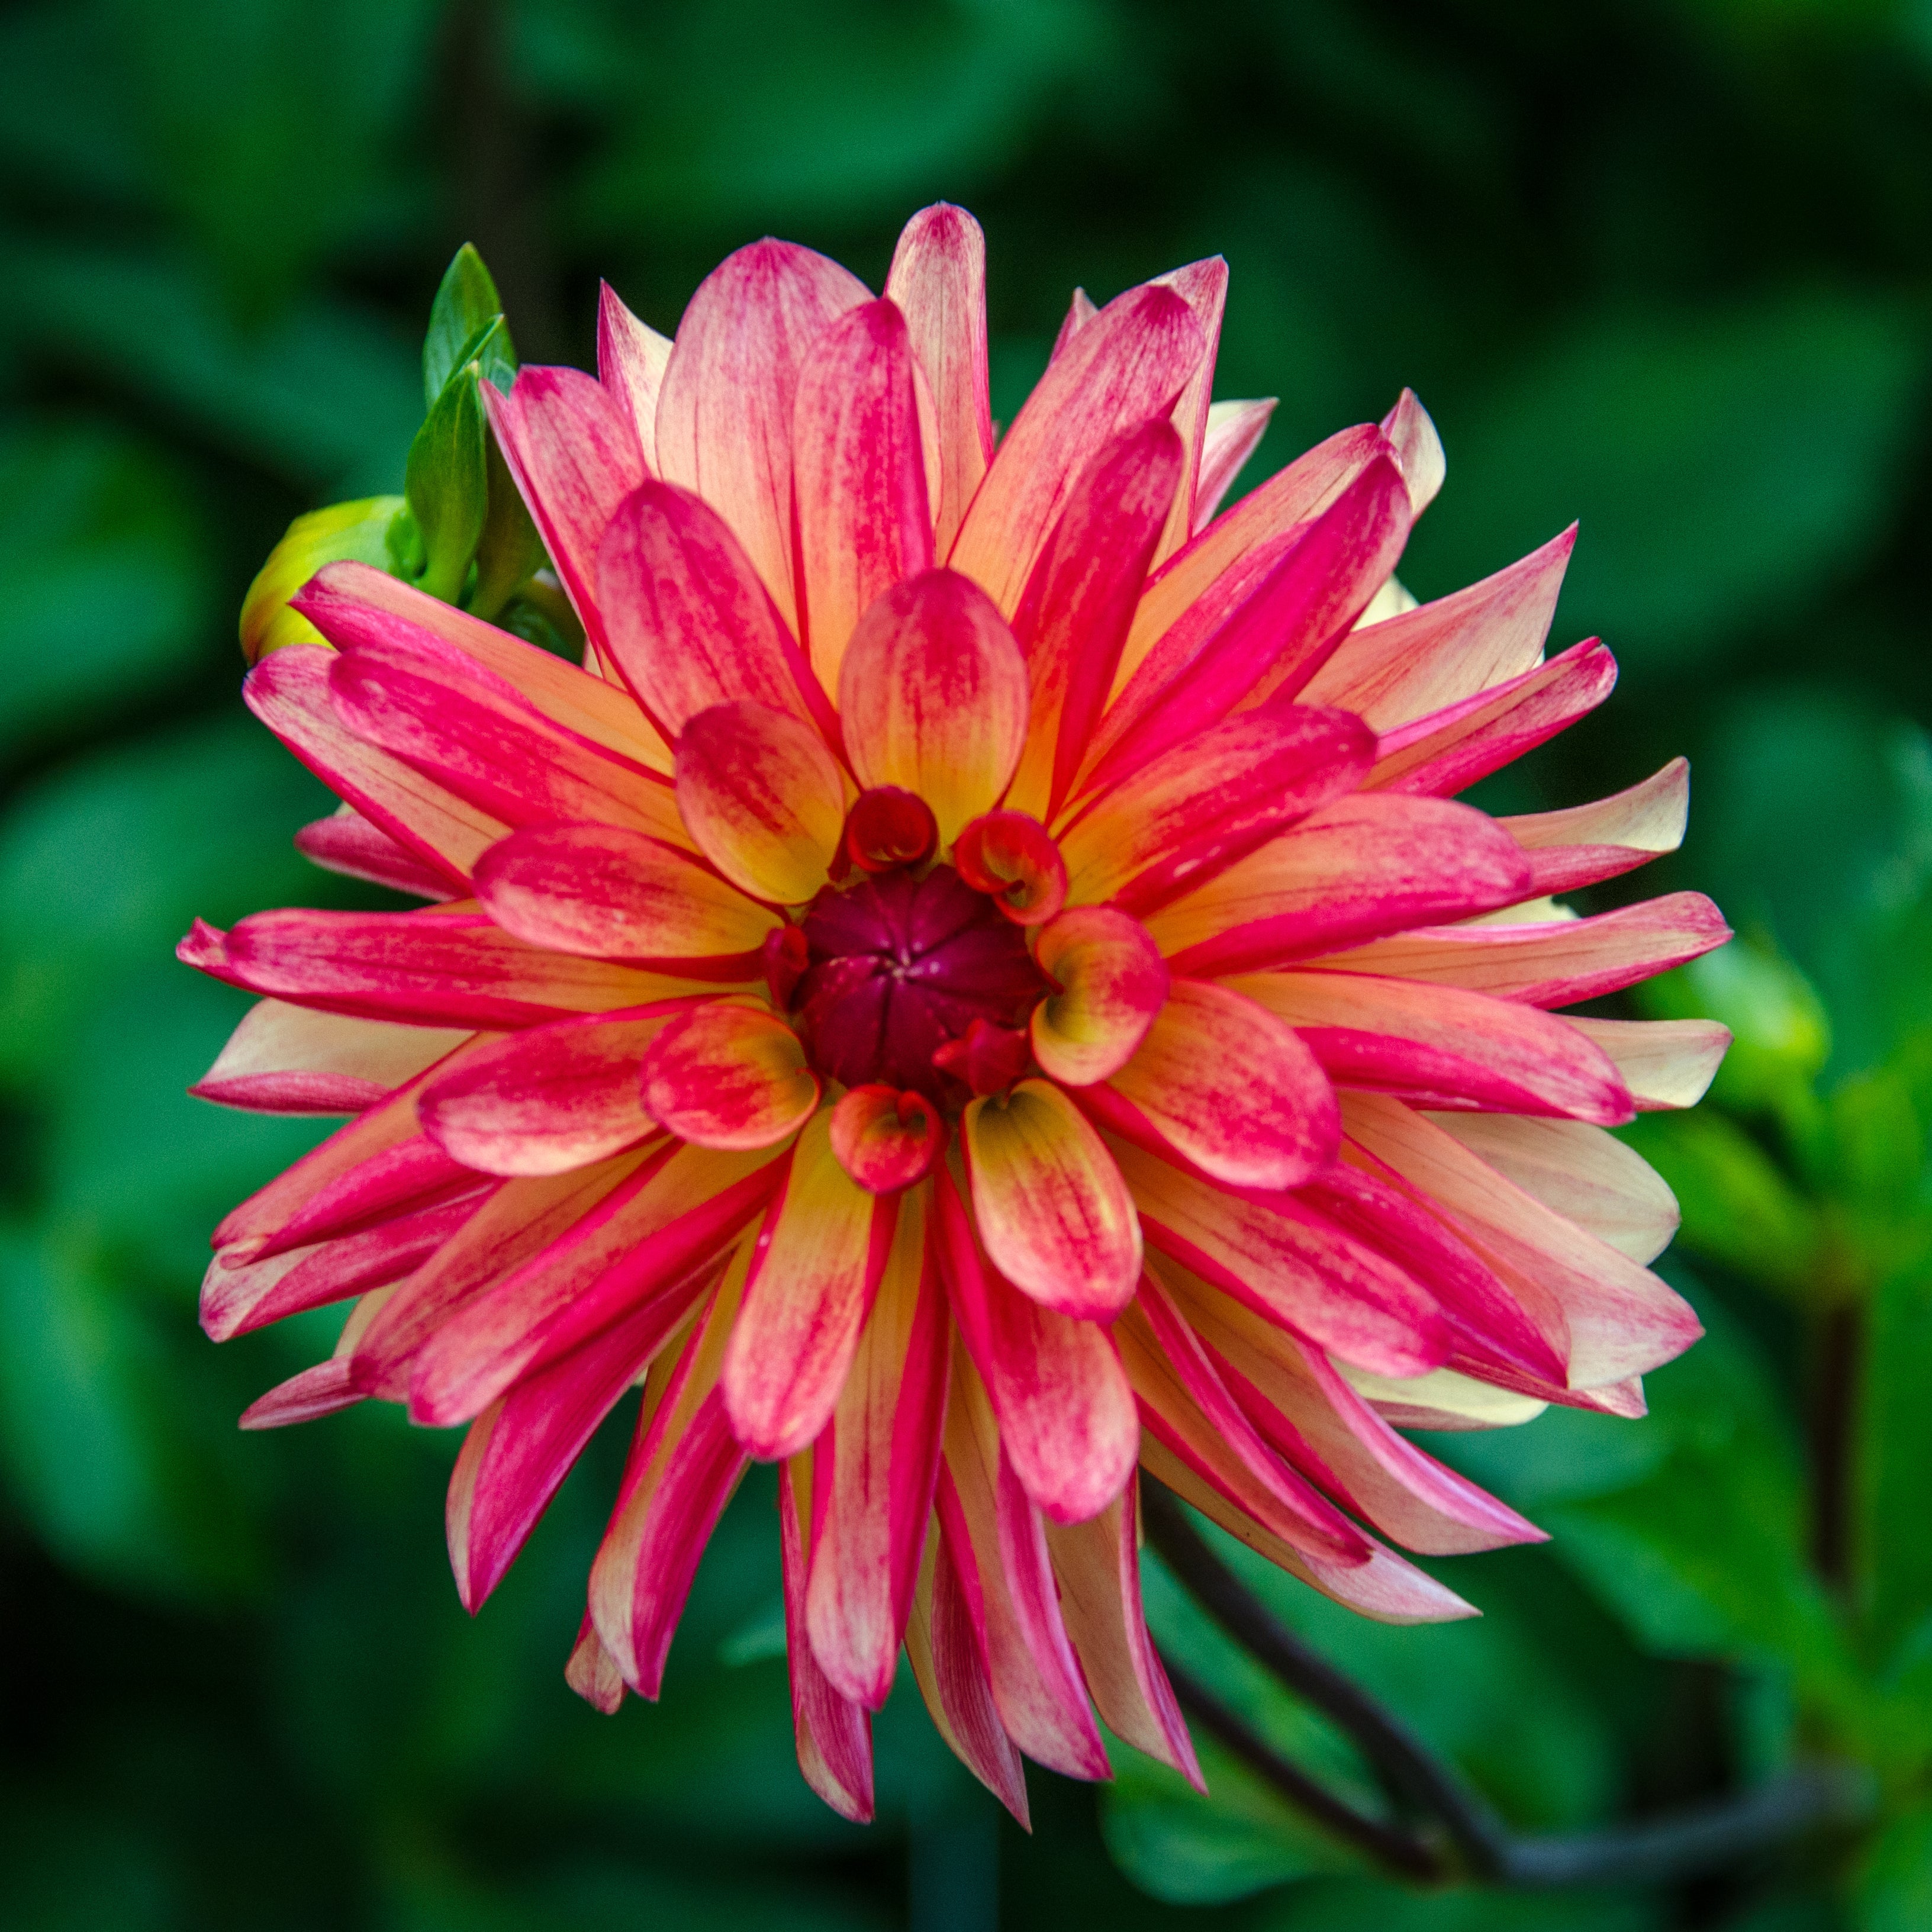 Dahlia 'Crazy Legs' decorative small flowered - 2, 3 or 5 tubers - Free delivery within the UK